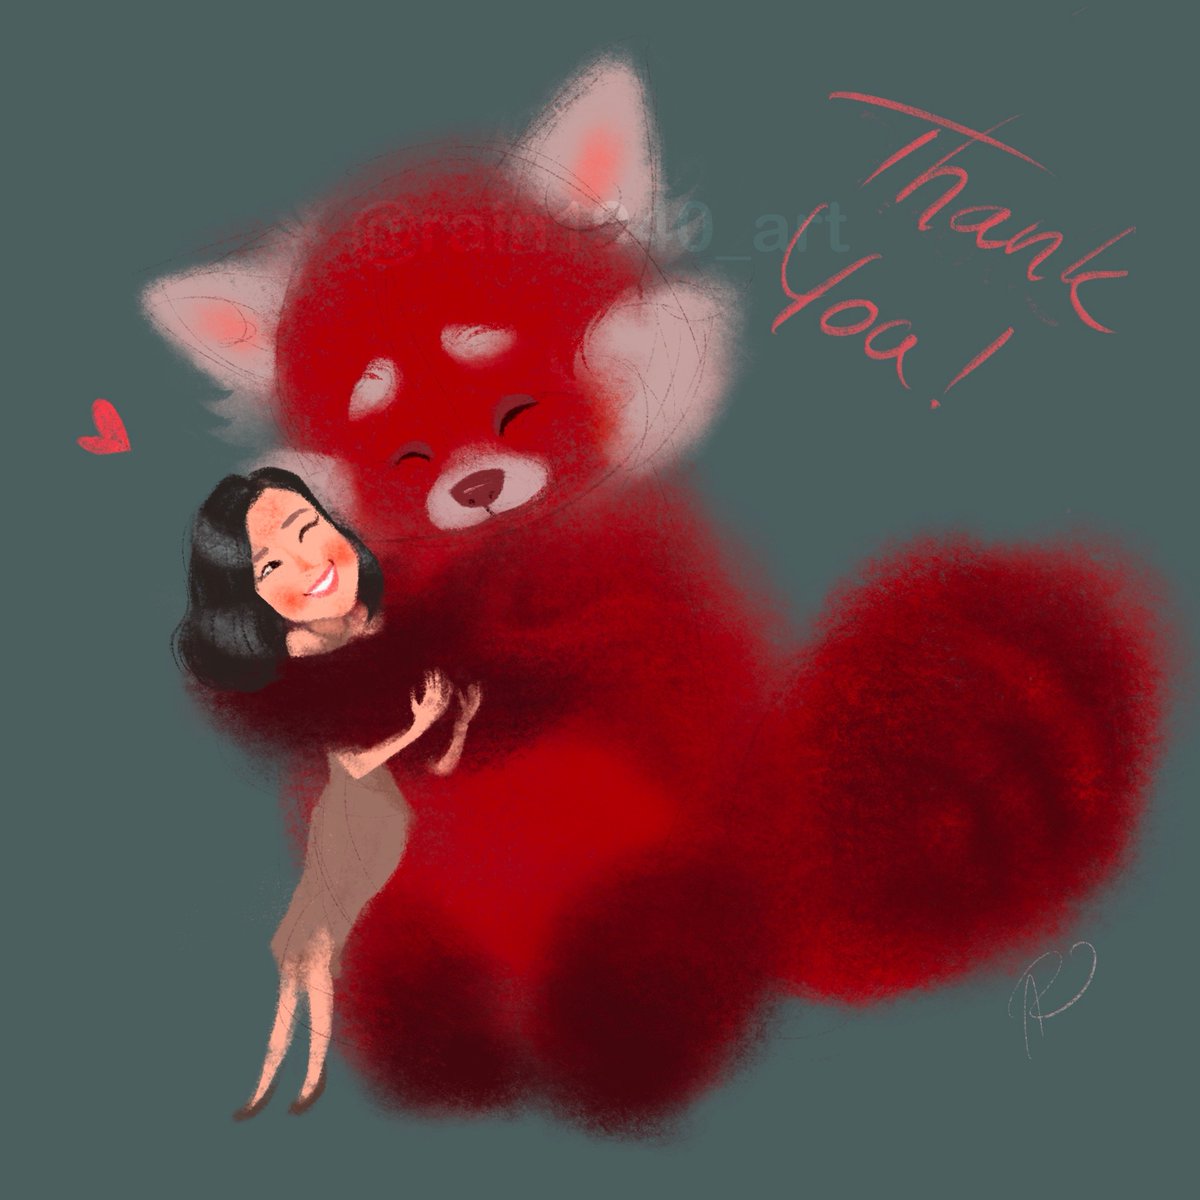 Thank you for Domee Shi and her amazing team at Pixar for waking up the sleeping red panda in us! 💗
#TurningRed #DomeeShi #redpanda #pixarfanart #procreate